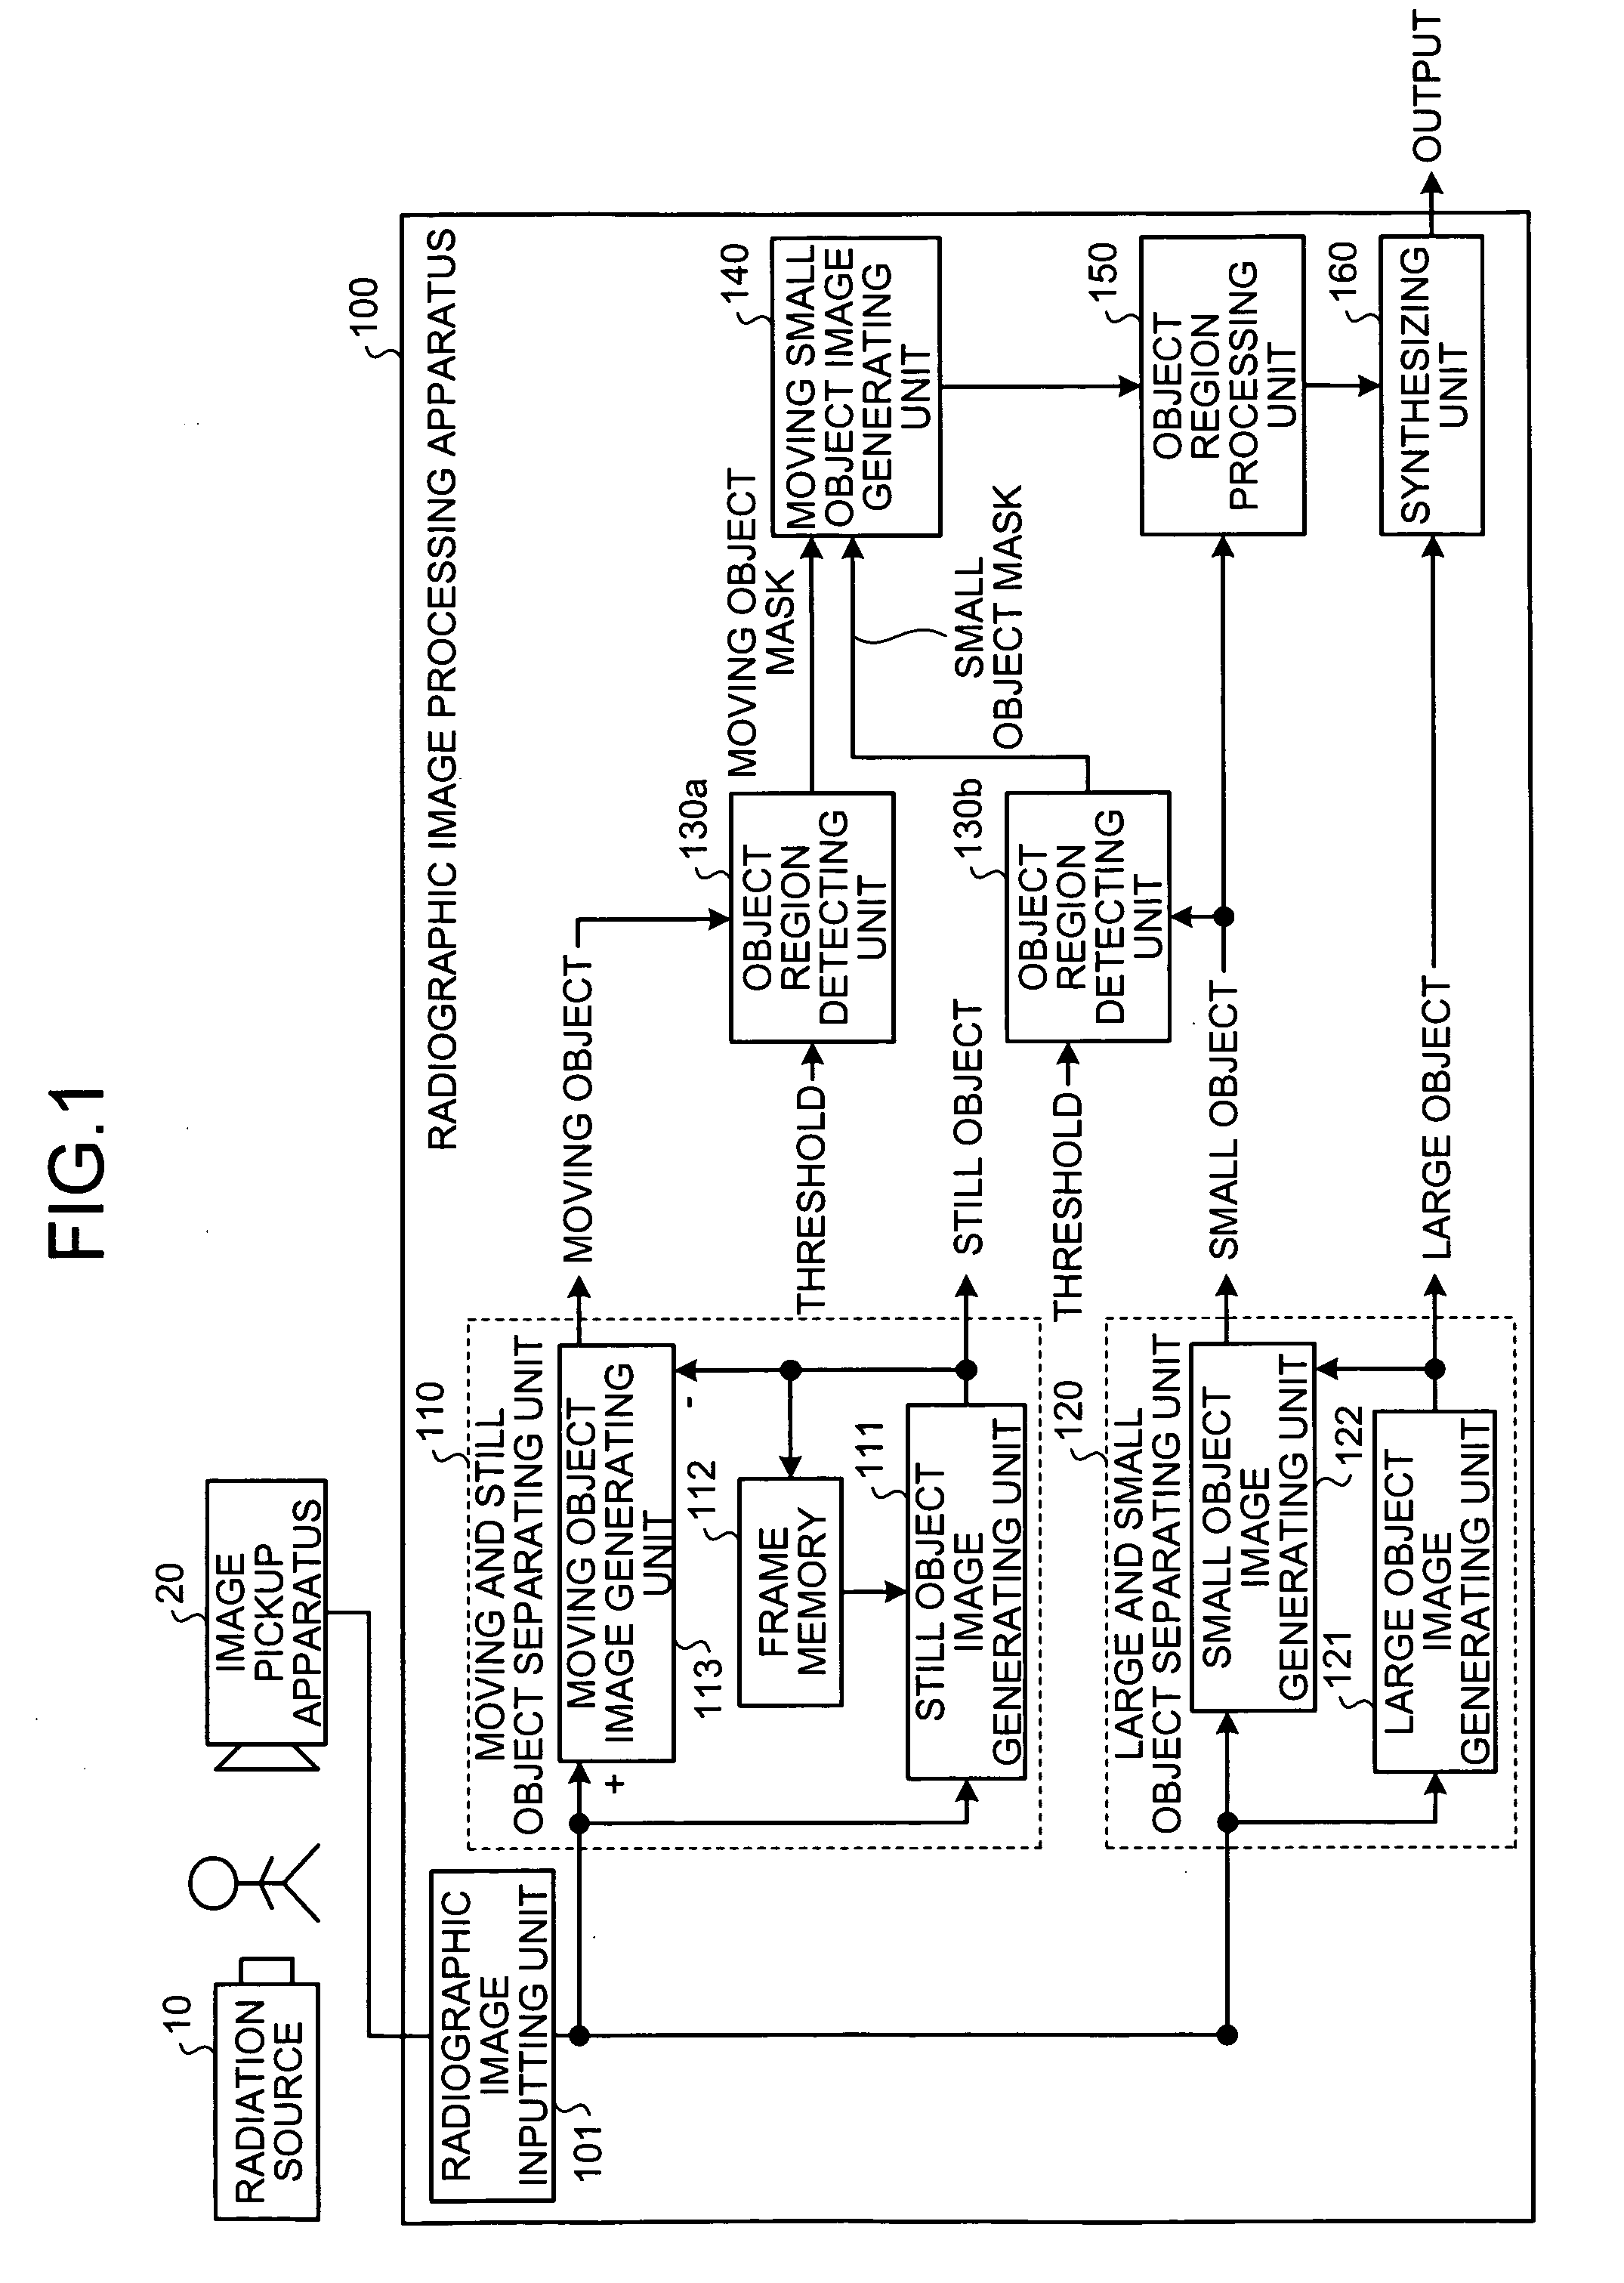 Radiographic image processing apparatus for processing radiographic image taken with radiation, method of radiographic image processing, and computer program product therefor